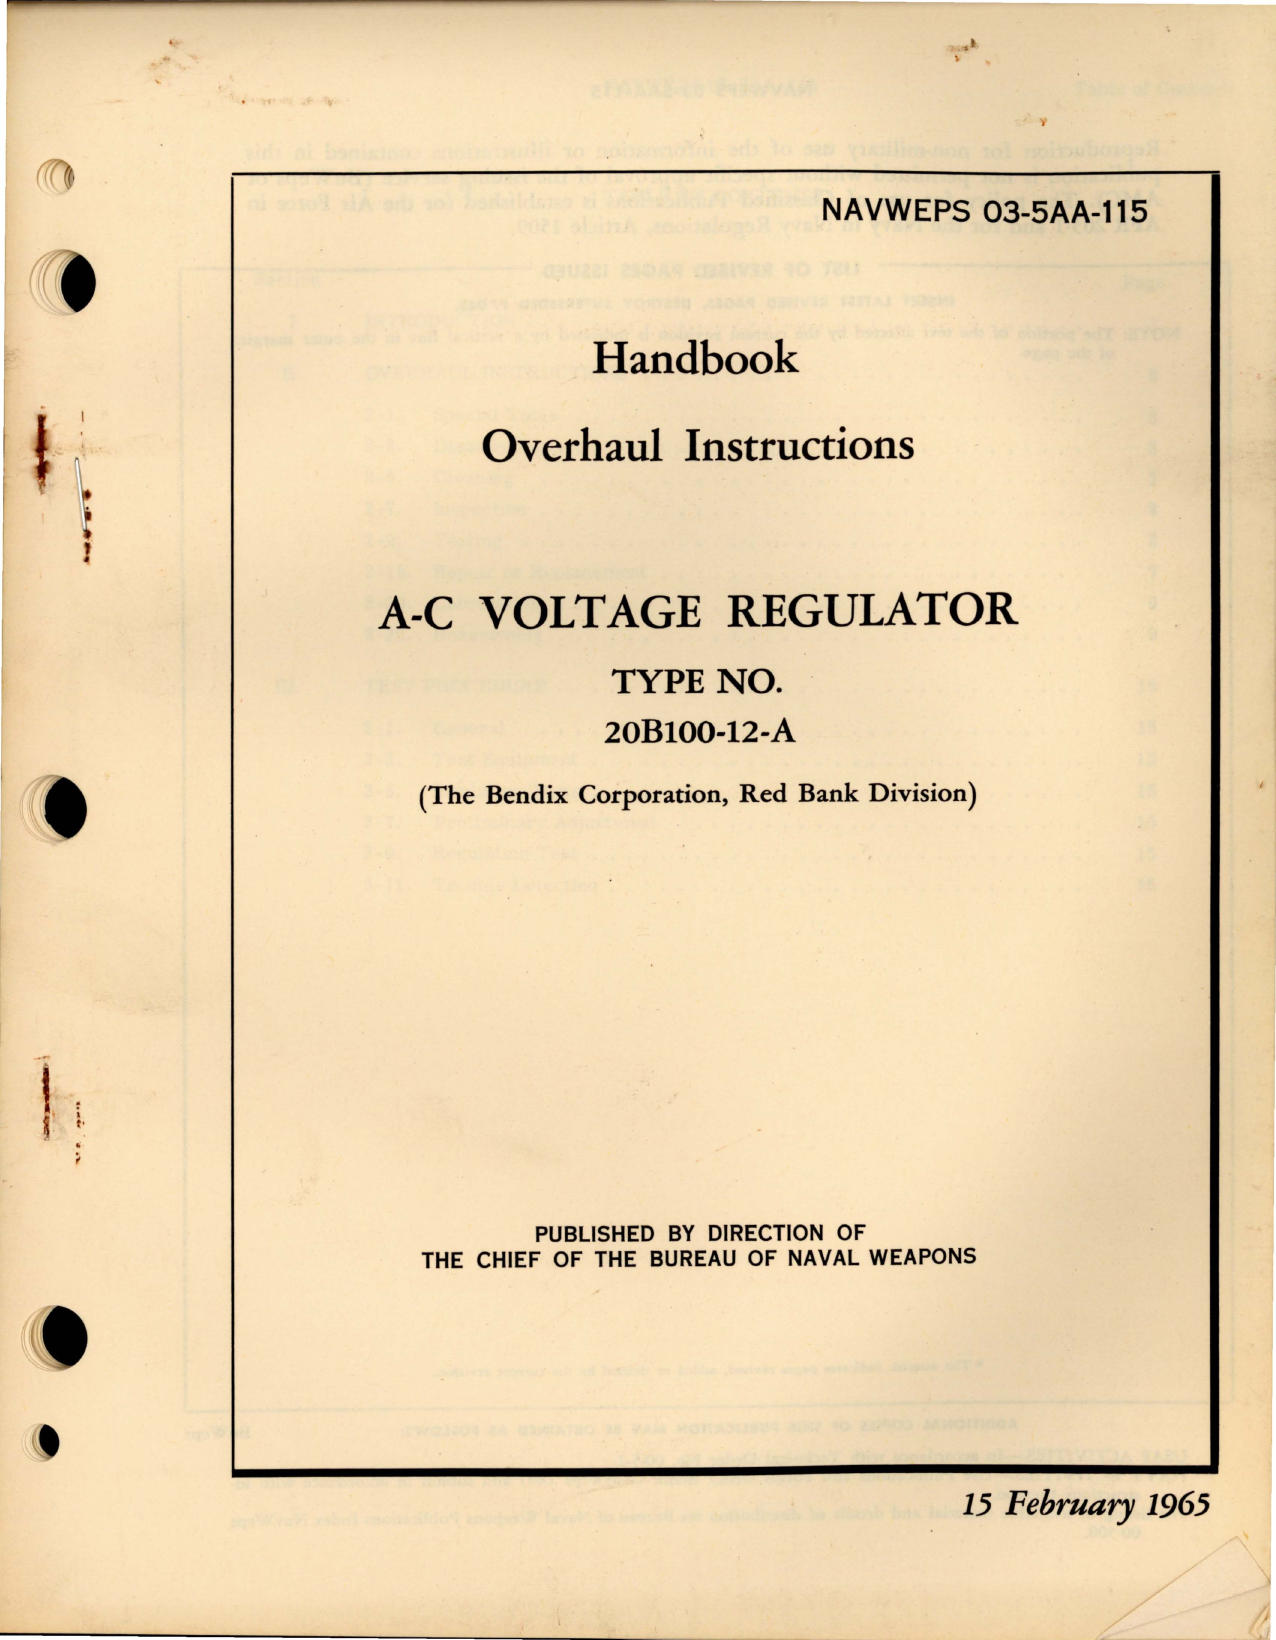 Sample page 1 from AirCorps Library document: Overhaul Instructions for AC Voltage Regulator - Type 20B100-12-A